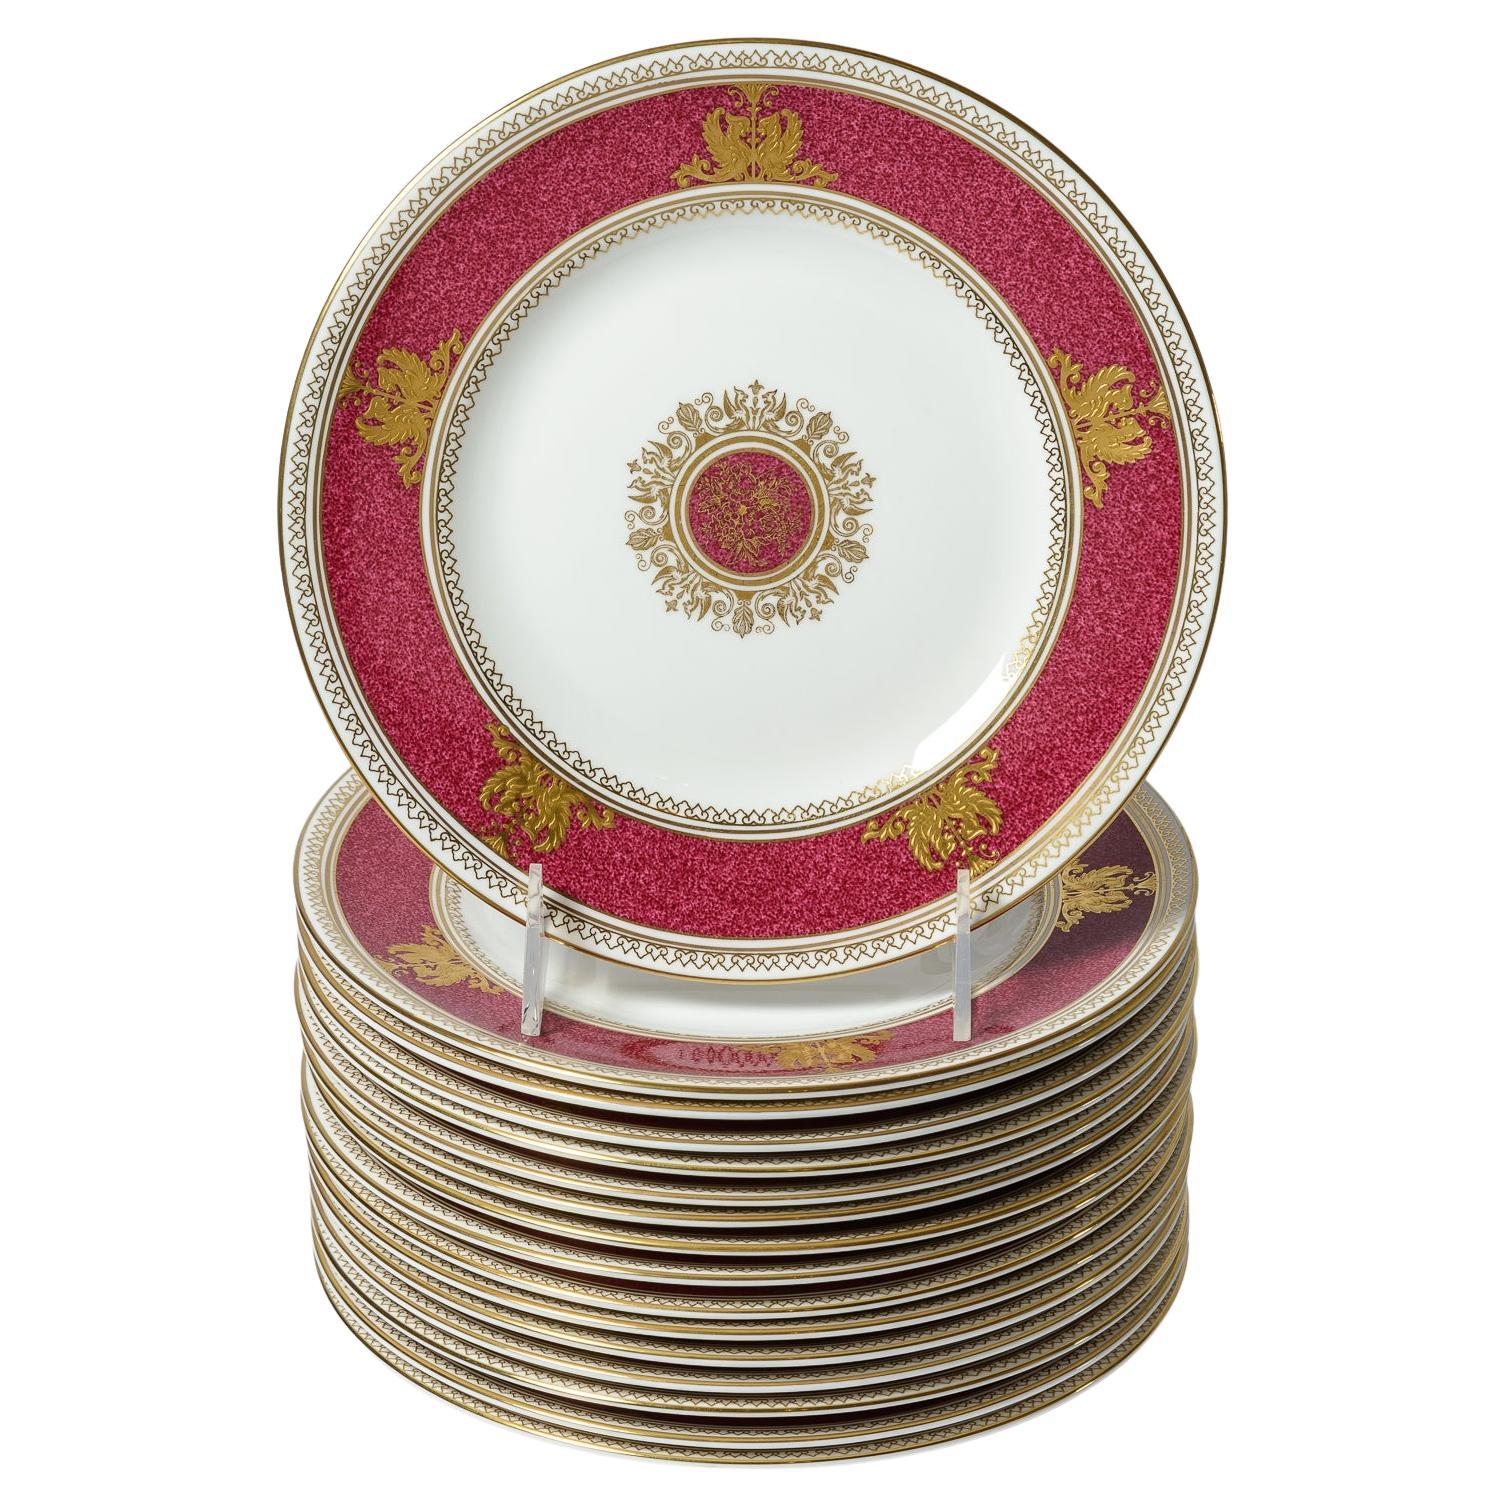 16 Vintage Wedgwood Ruby Gilt Encrusted Dessert or First Course Plates